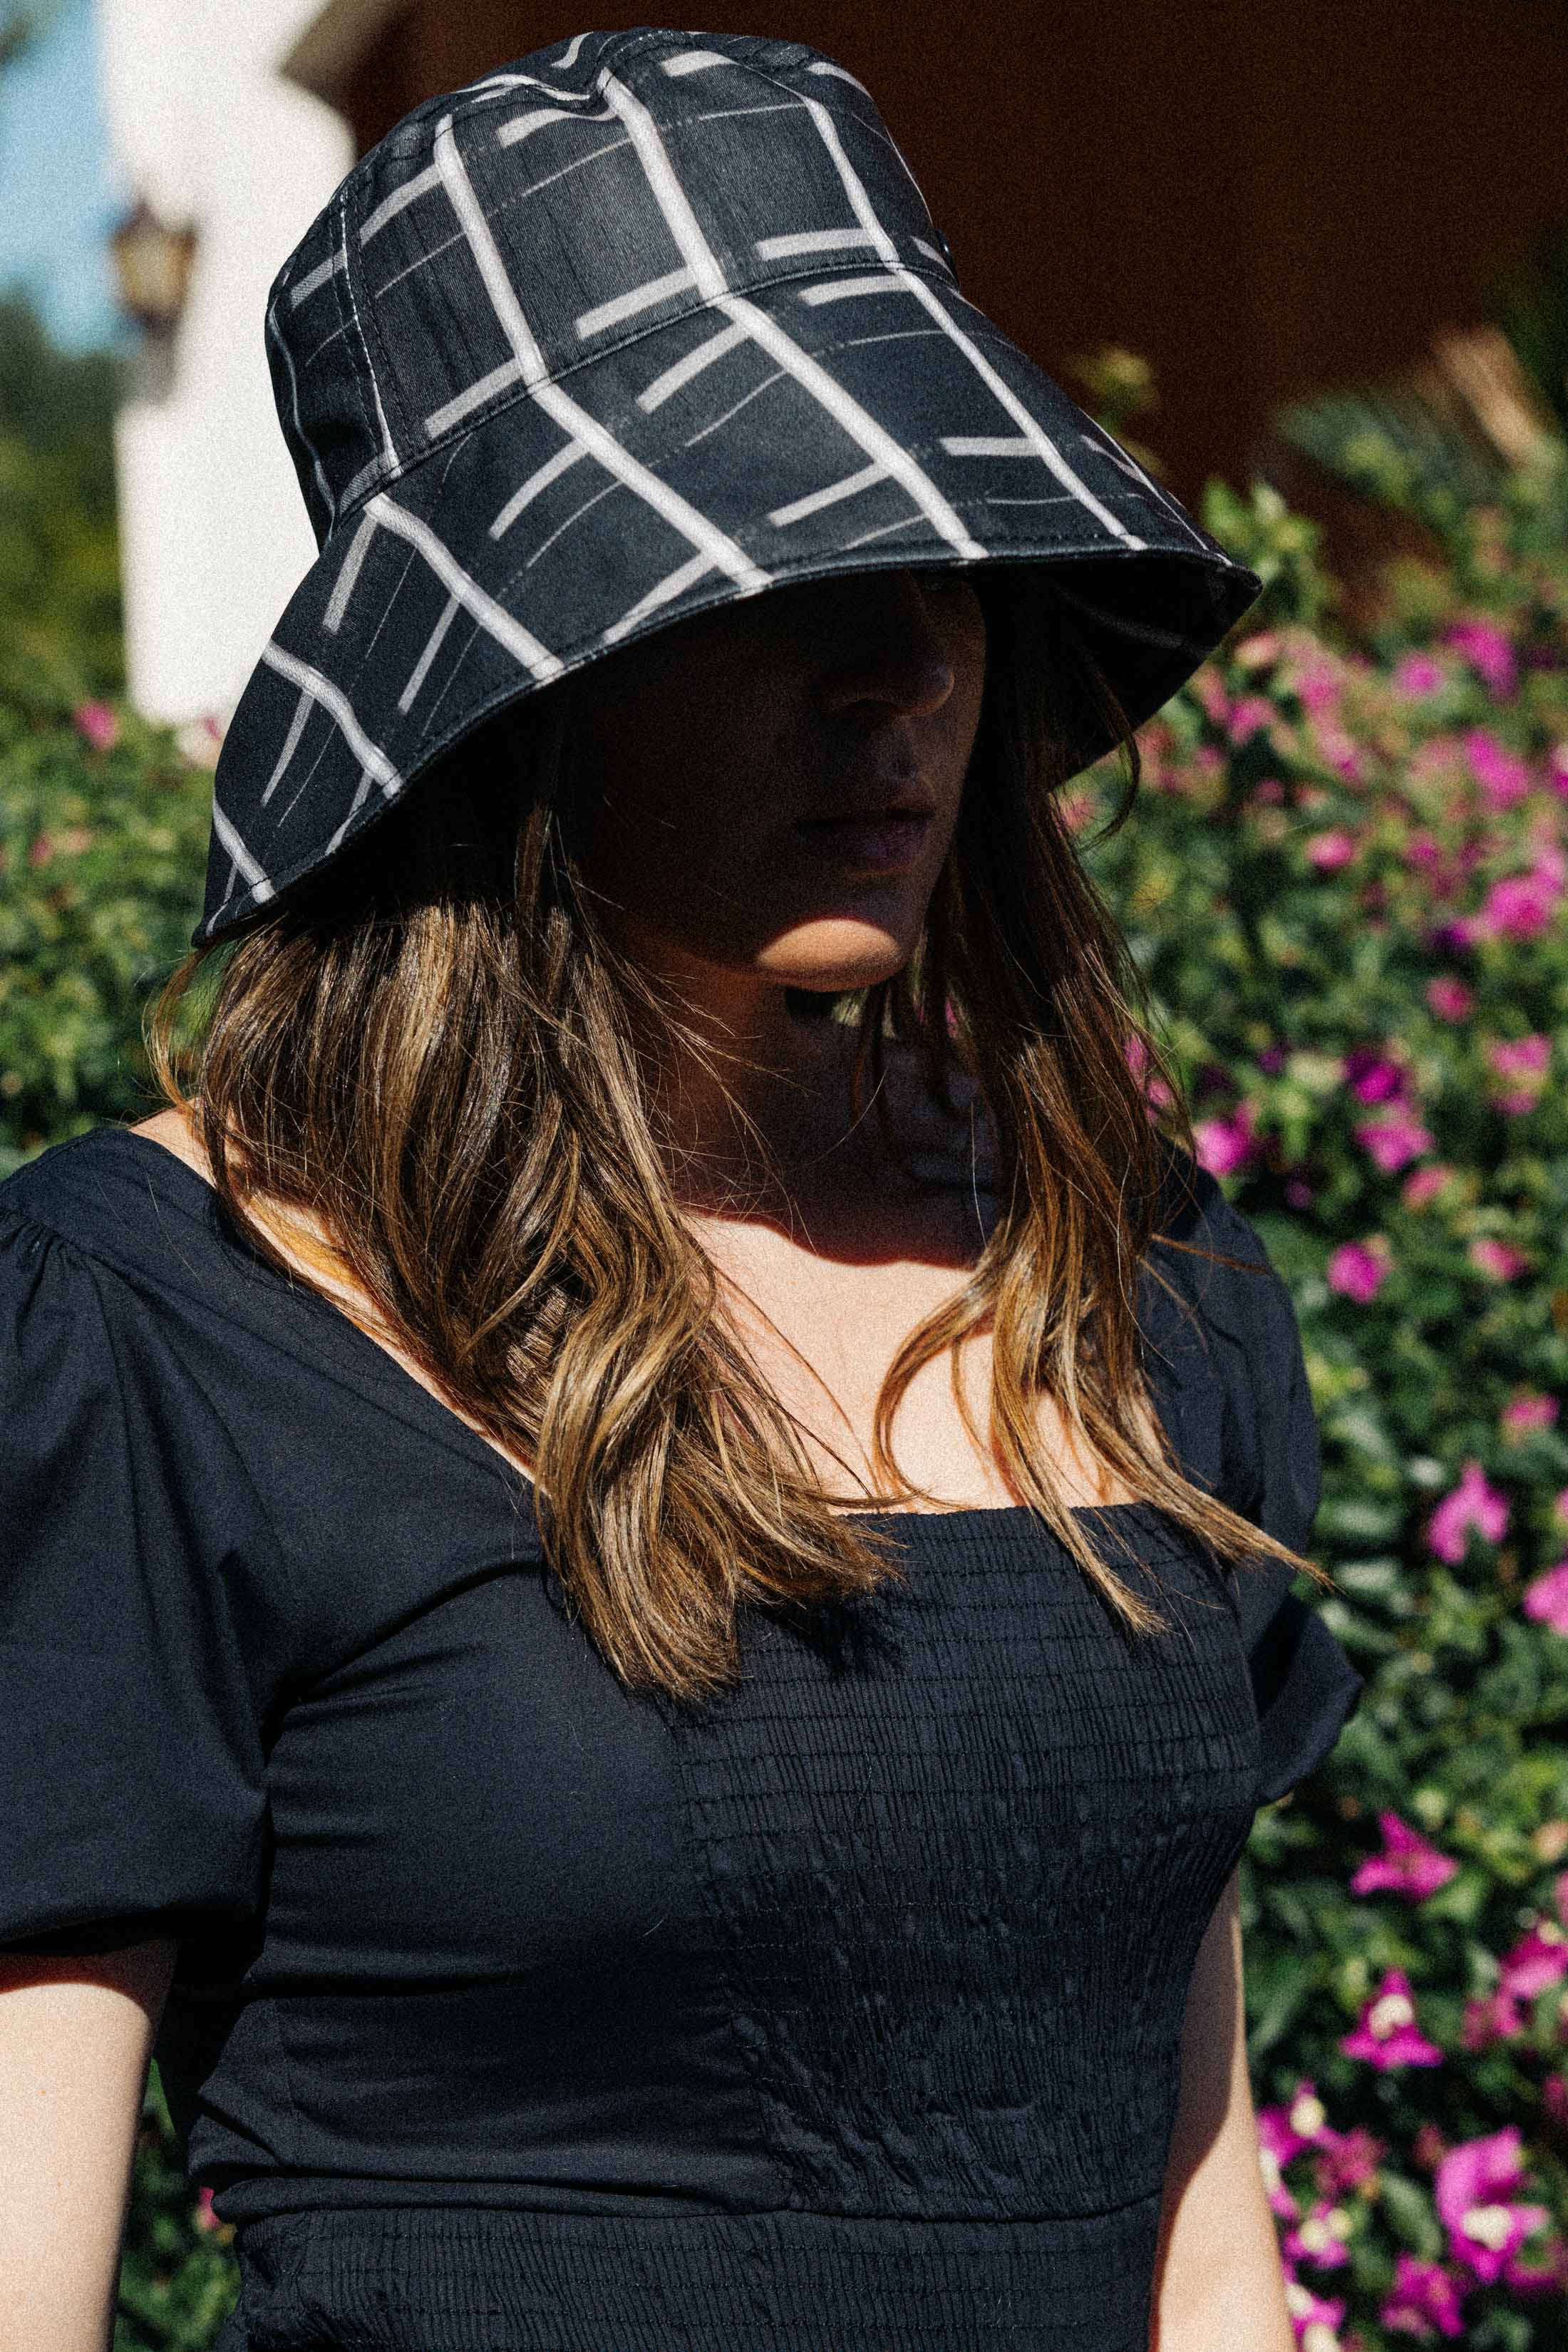 Maristella wears the Paulina hat from Maison Michel Spring 2019